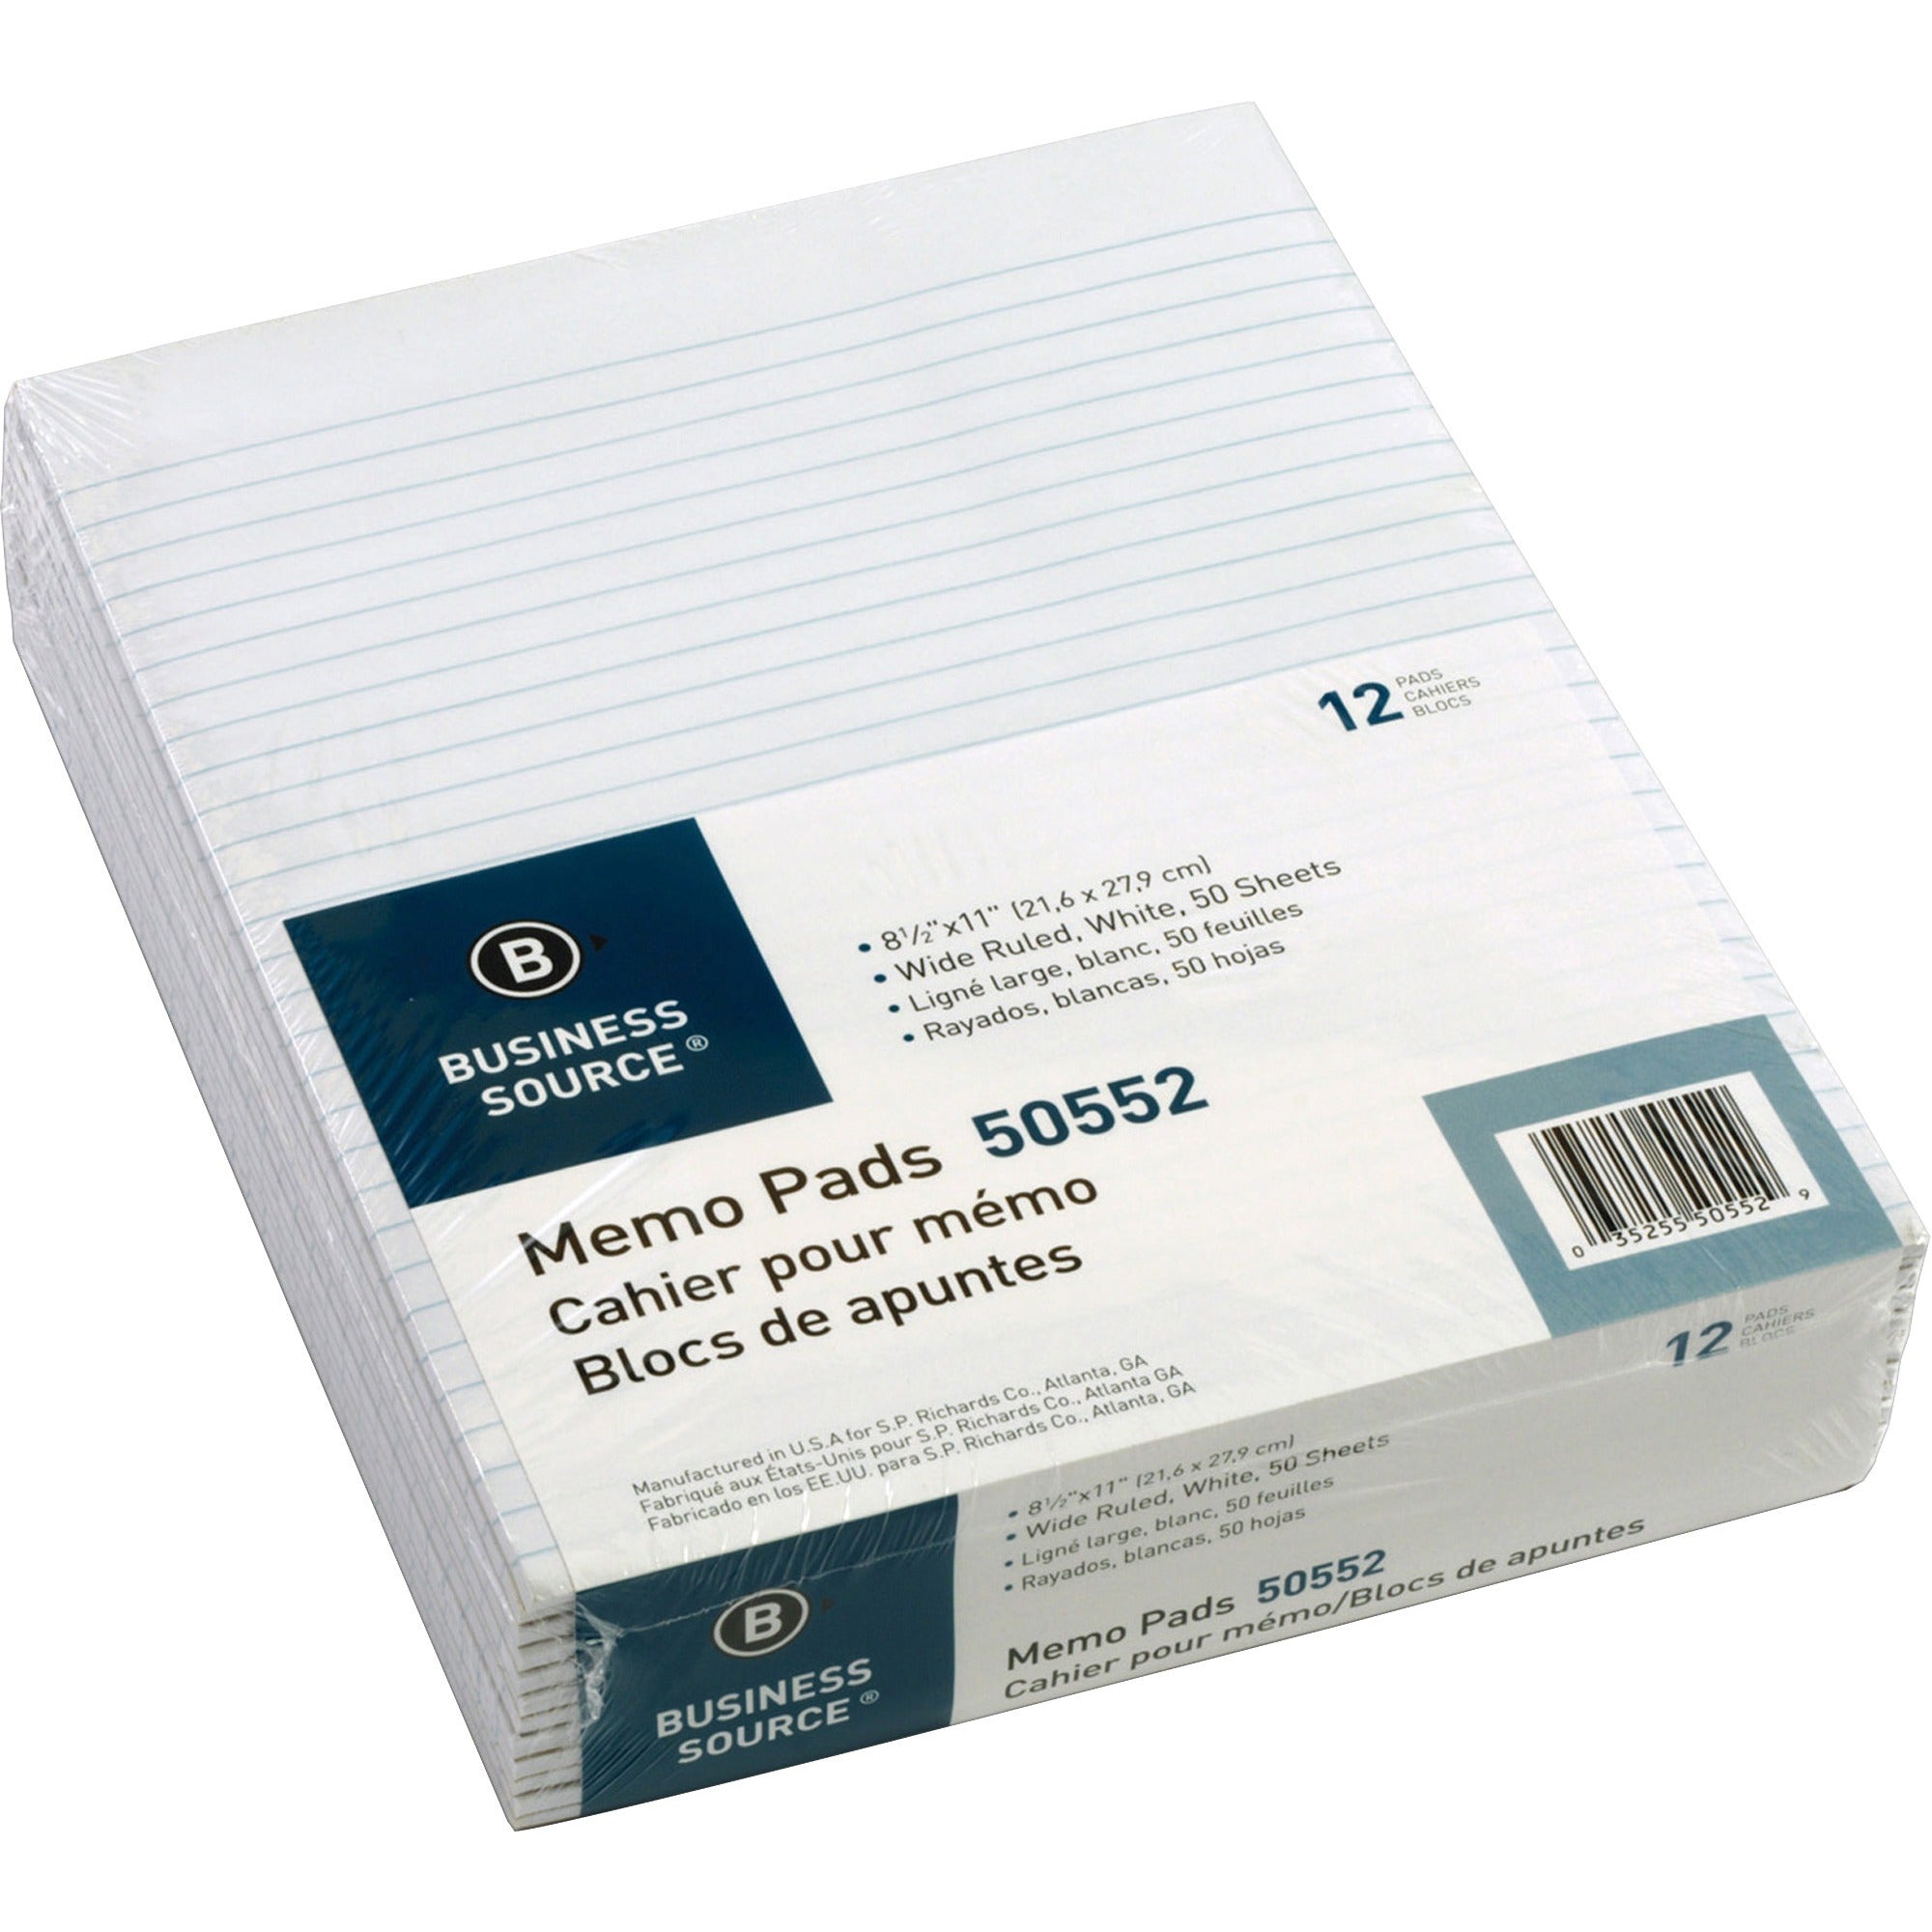 Business Source Glued Top Ruled Memo Pads - Letter - 50 Sheets - Glue - Wide Ruled - 16 lb Basis Weight - Letter - 8 1/2" x 11" - White Paper - 1 Dozen - 